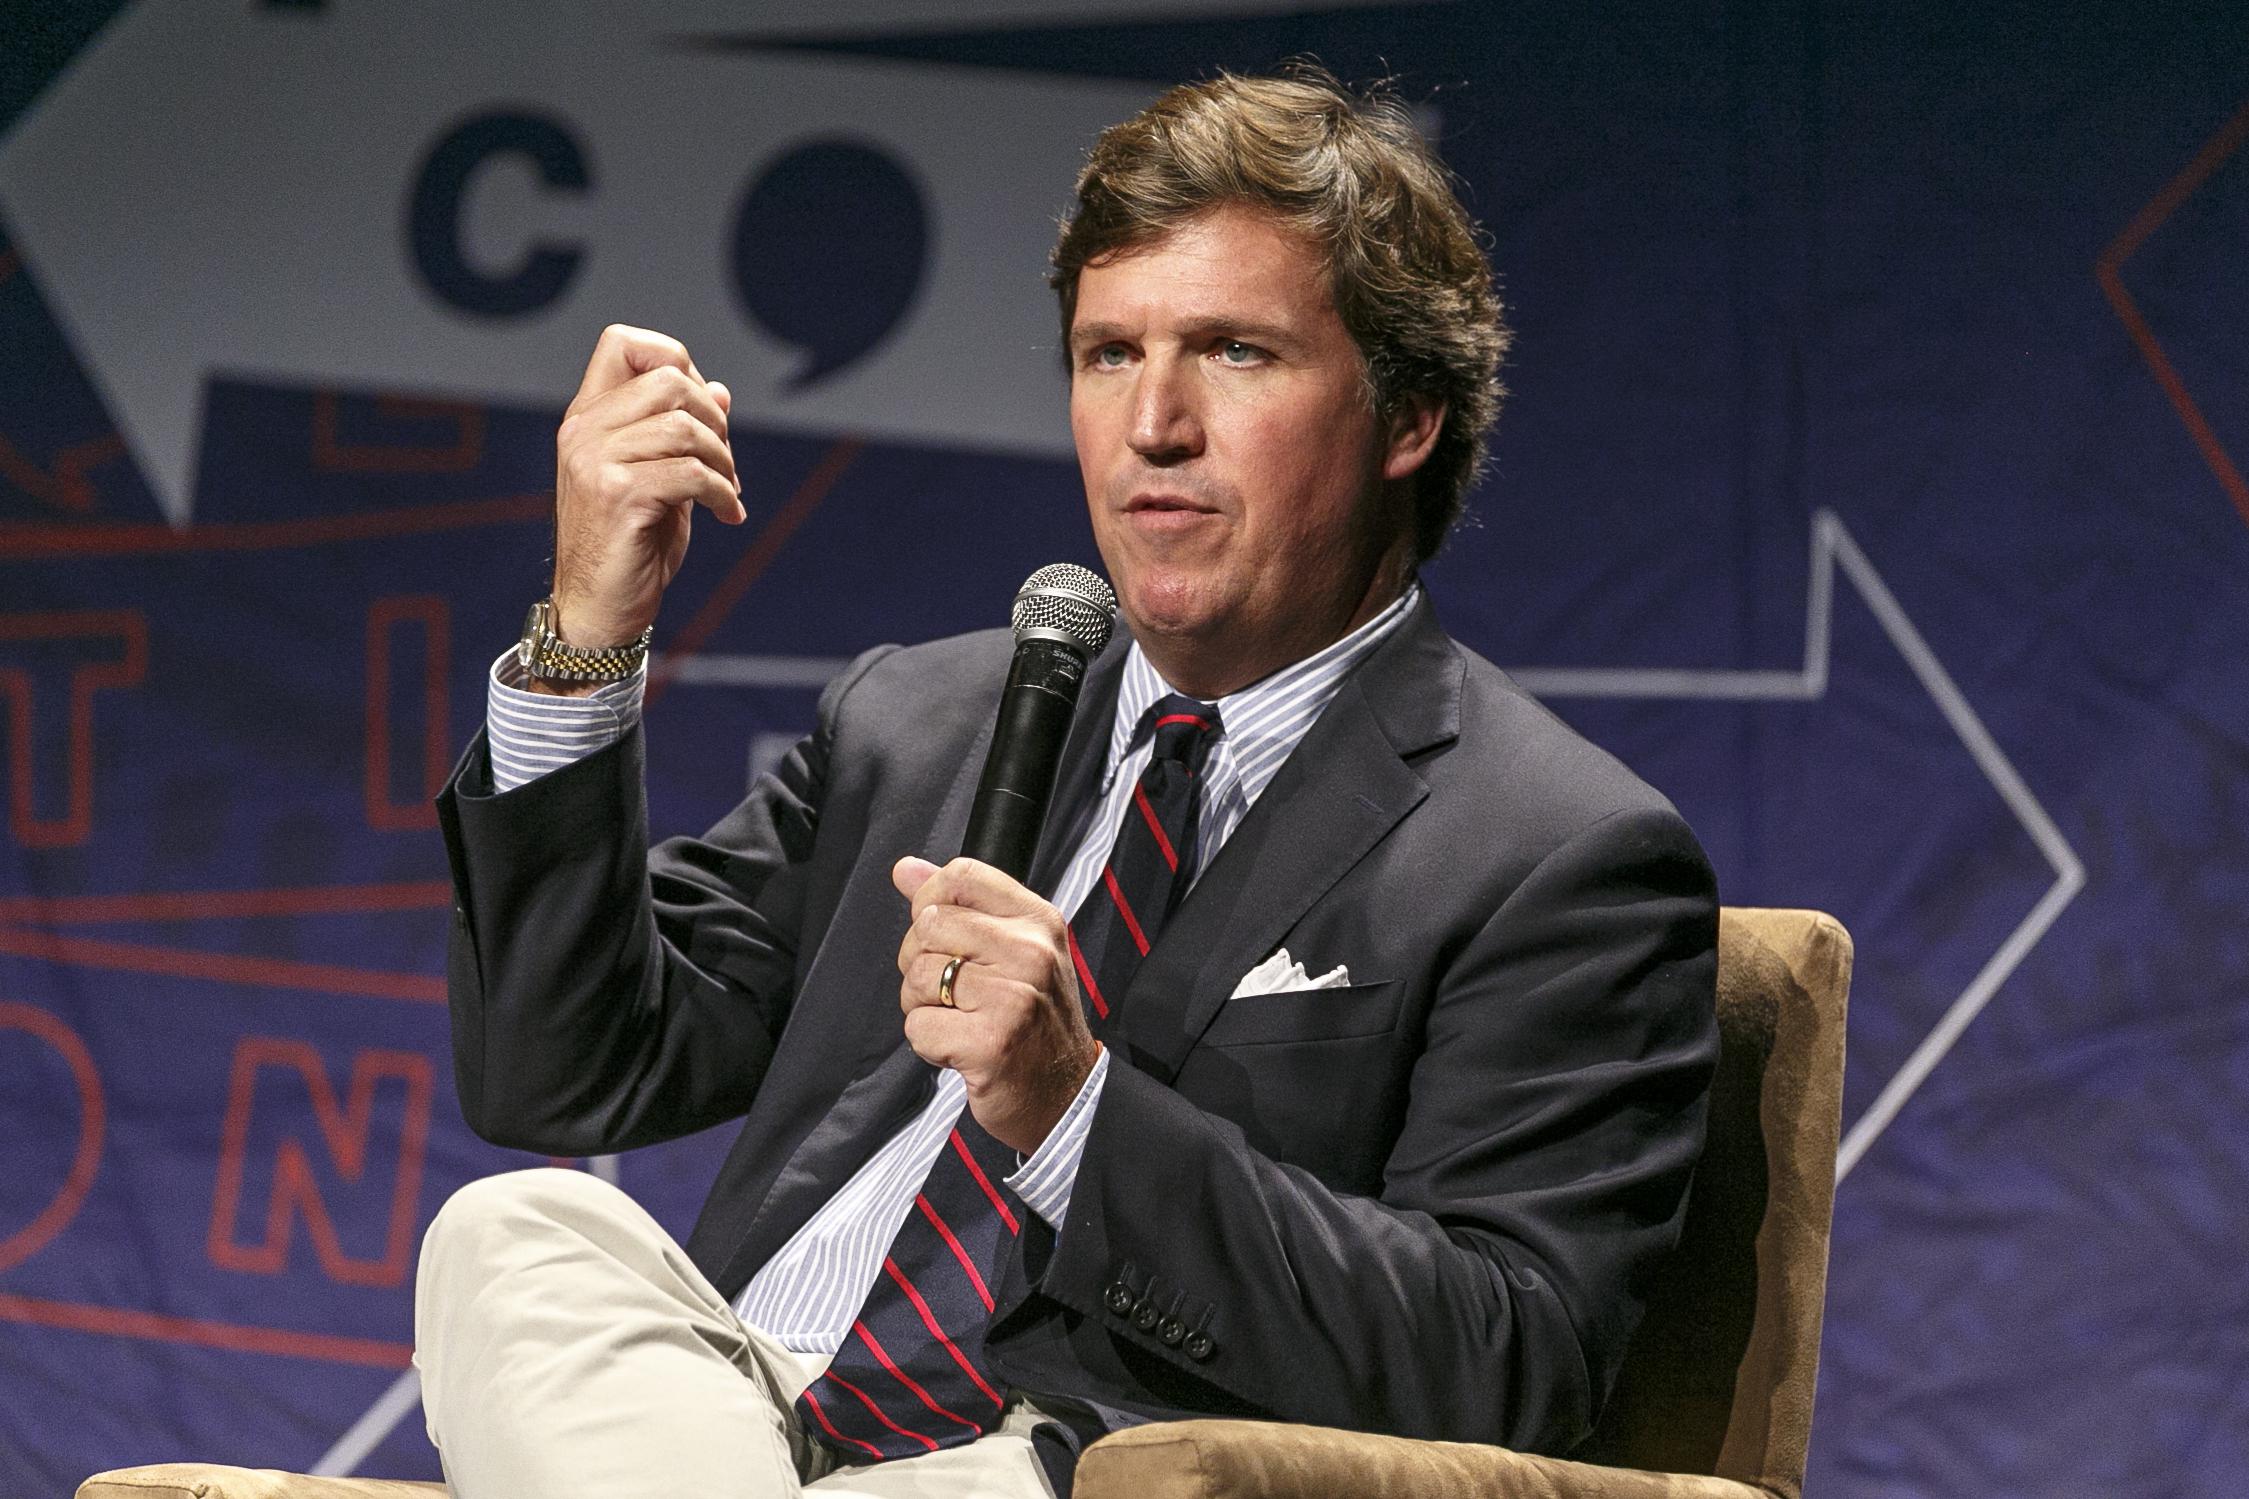 Carlson sits casually in a chair on a stage and speaks into a microphone while gesturing with his hand.